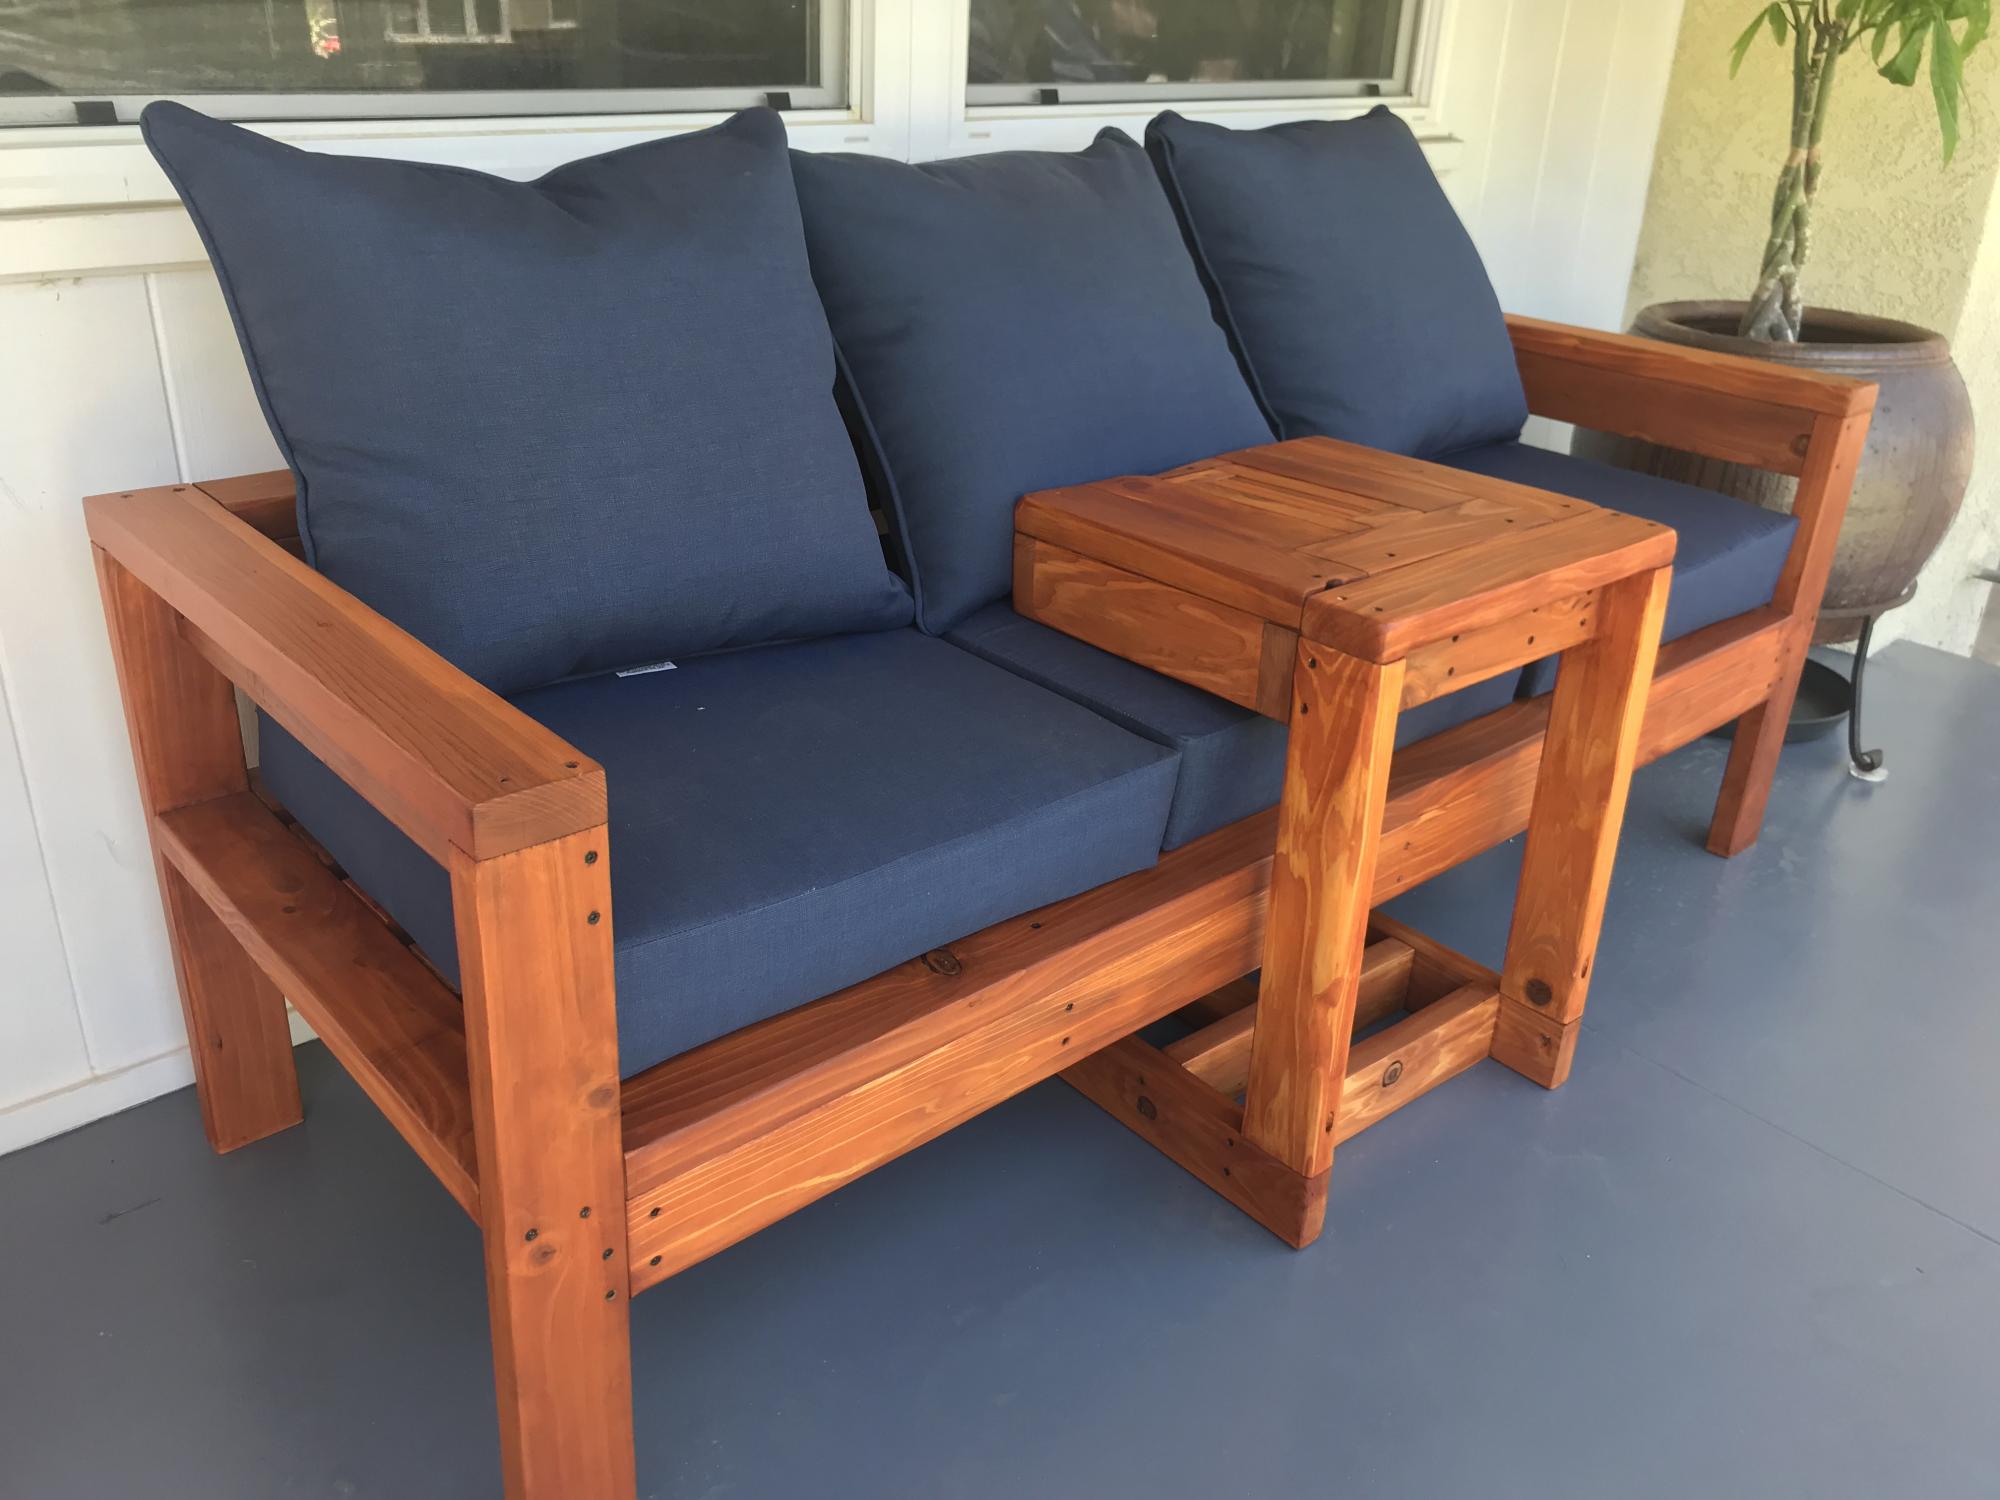 DIY sofa couch / slide in coffee table